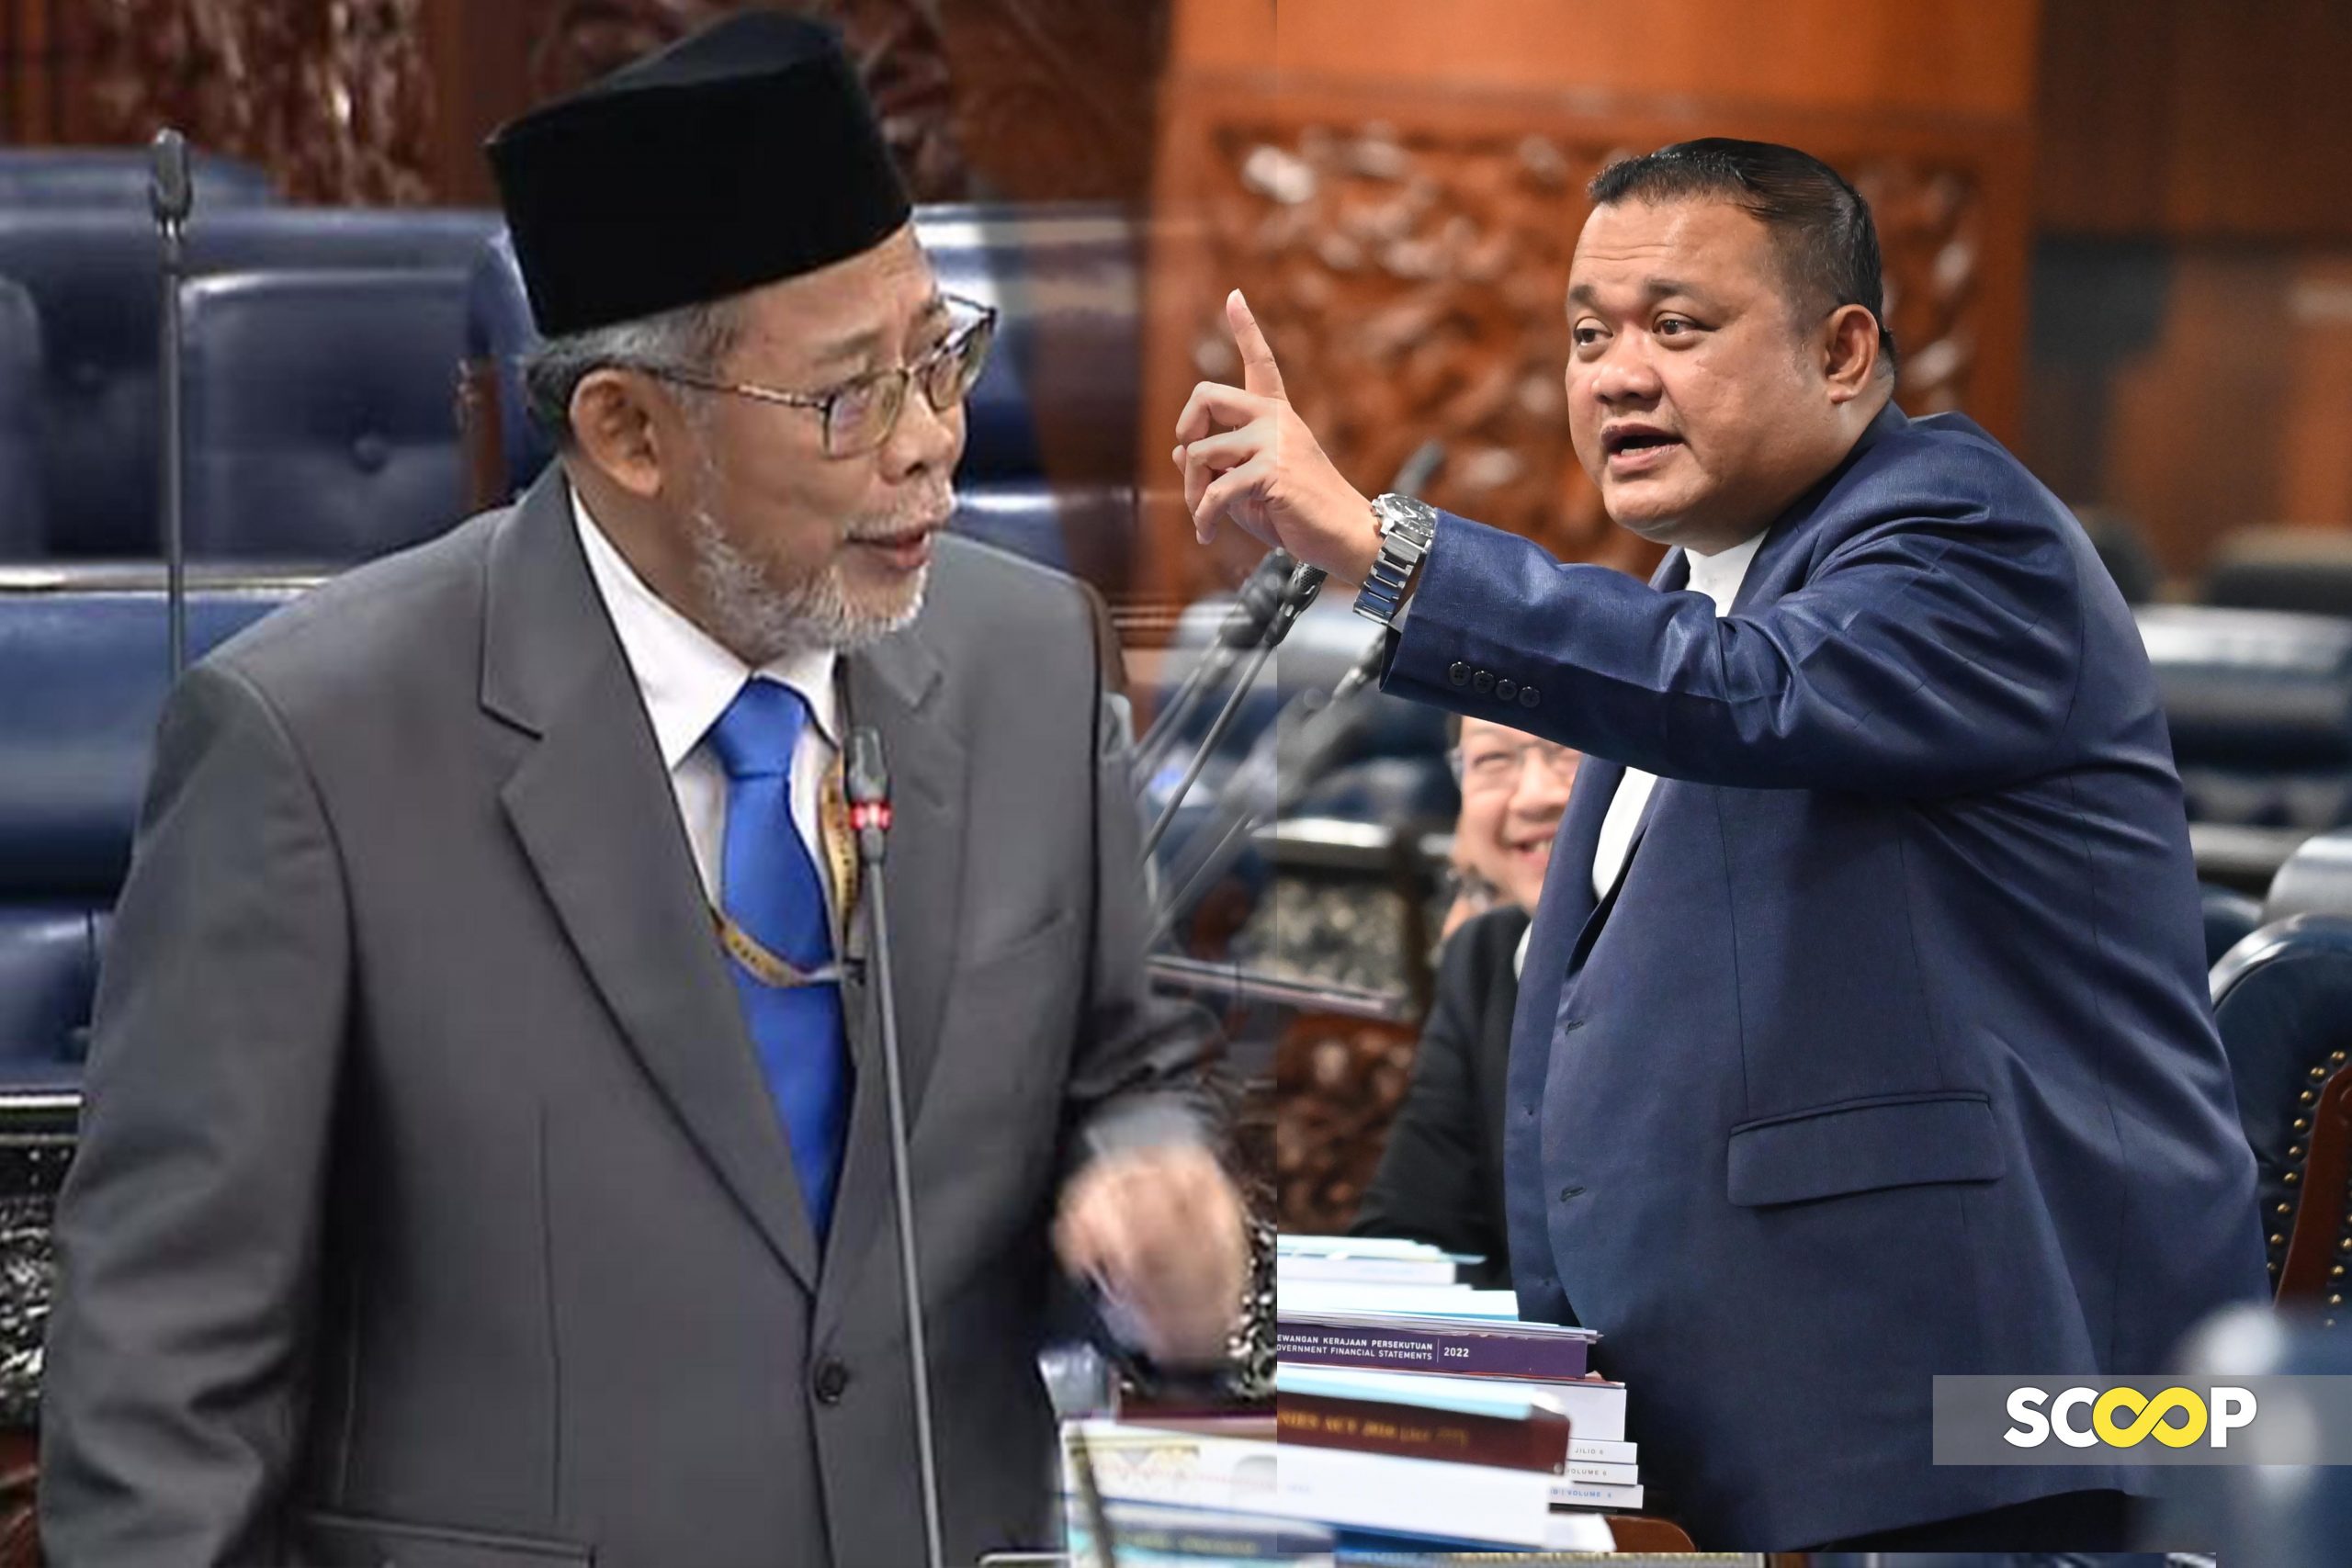 Shouting match in Dewan: reps in heated exchange ordered to exit, grab coffee